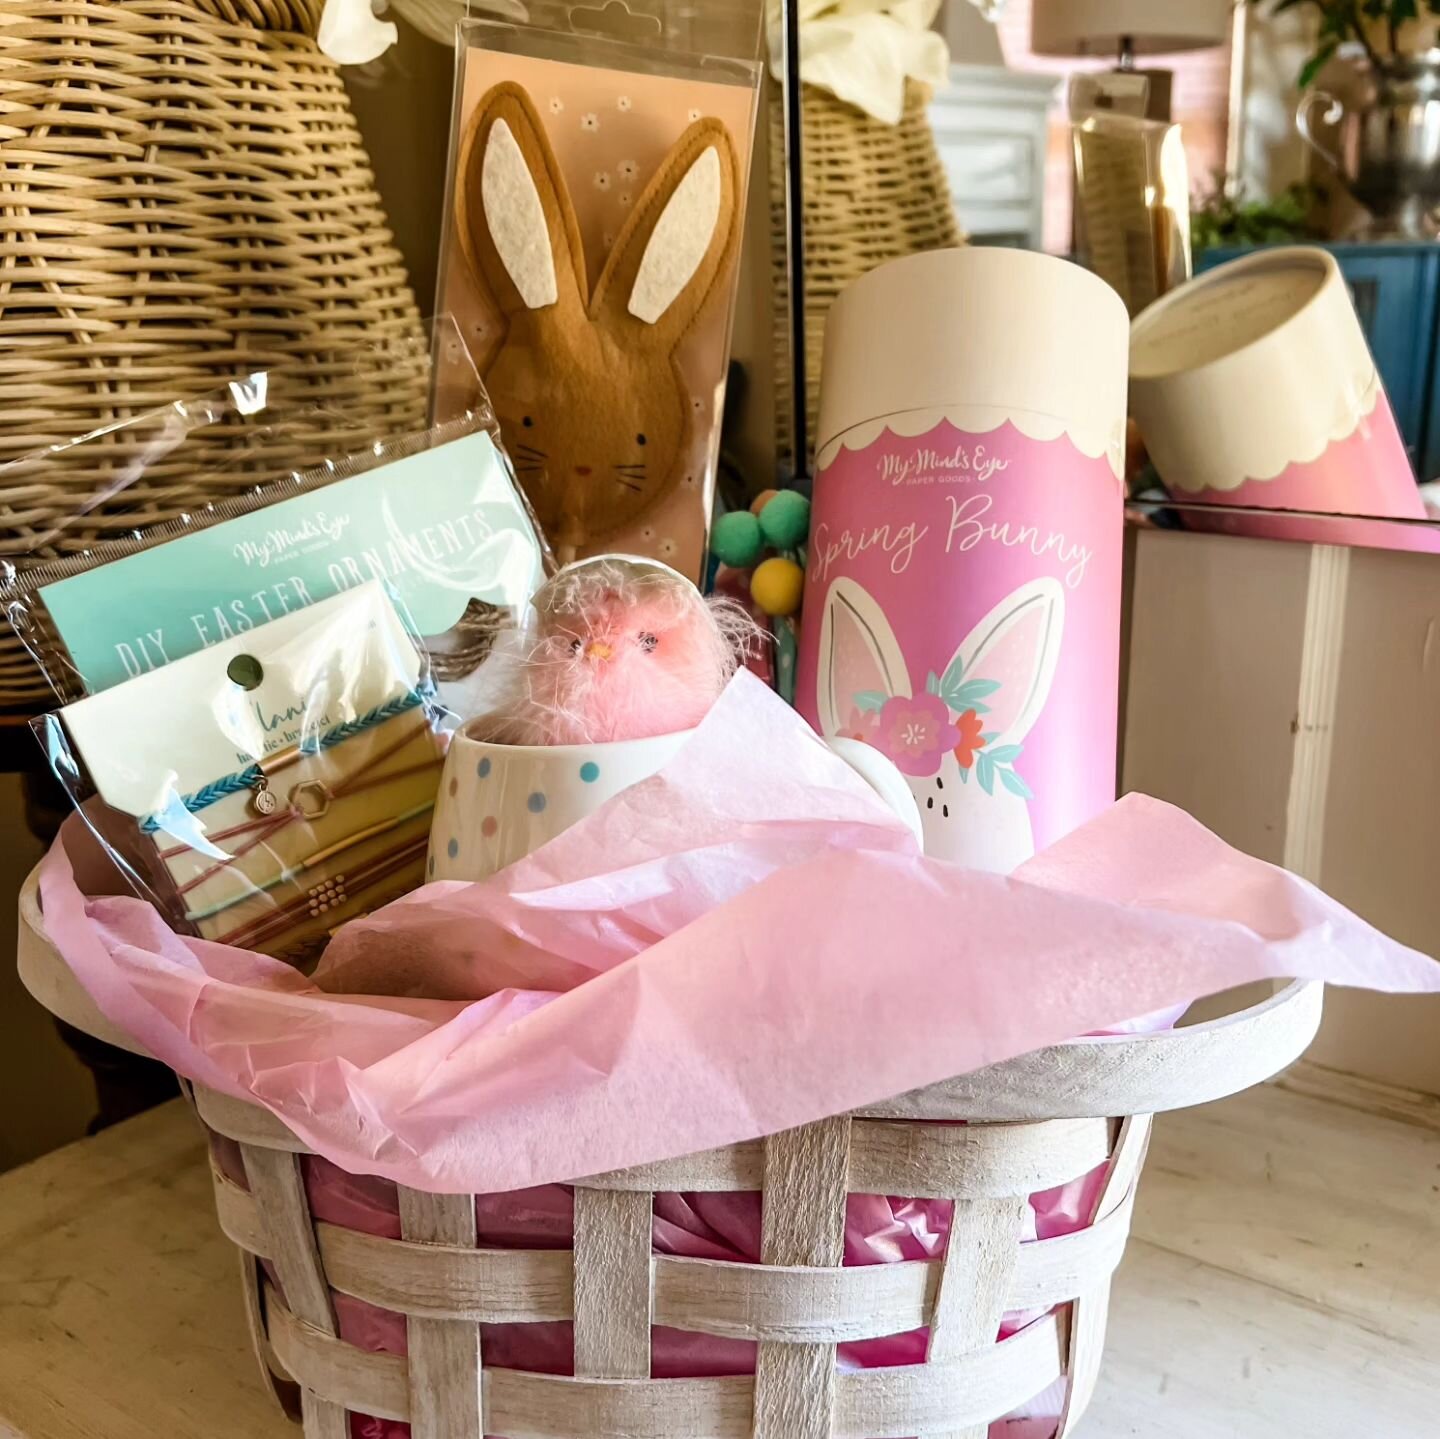 This Saturday, during our Bonus Shopping Day, we'll have everything you need to create your own Easter baskets! Or, if you need a little inspiration, we can help! From chocolates to puzzles, to earrings and mugs, we have it all! Hop on over - Saturda